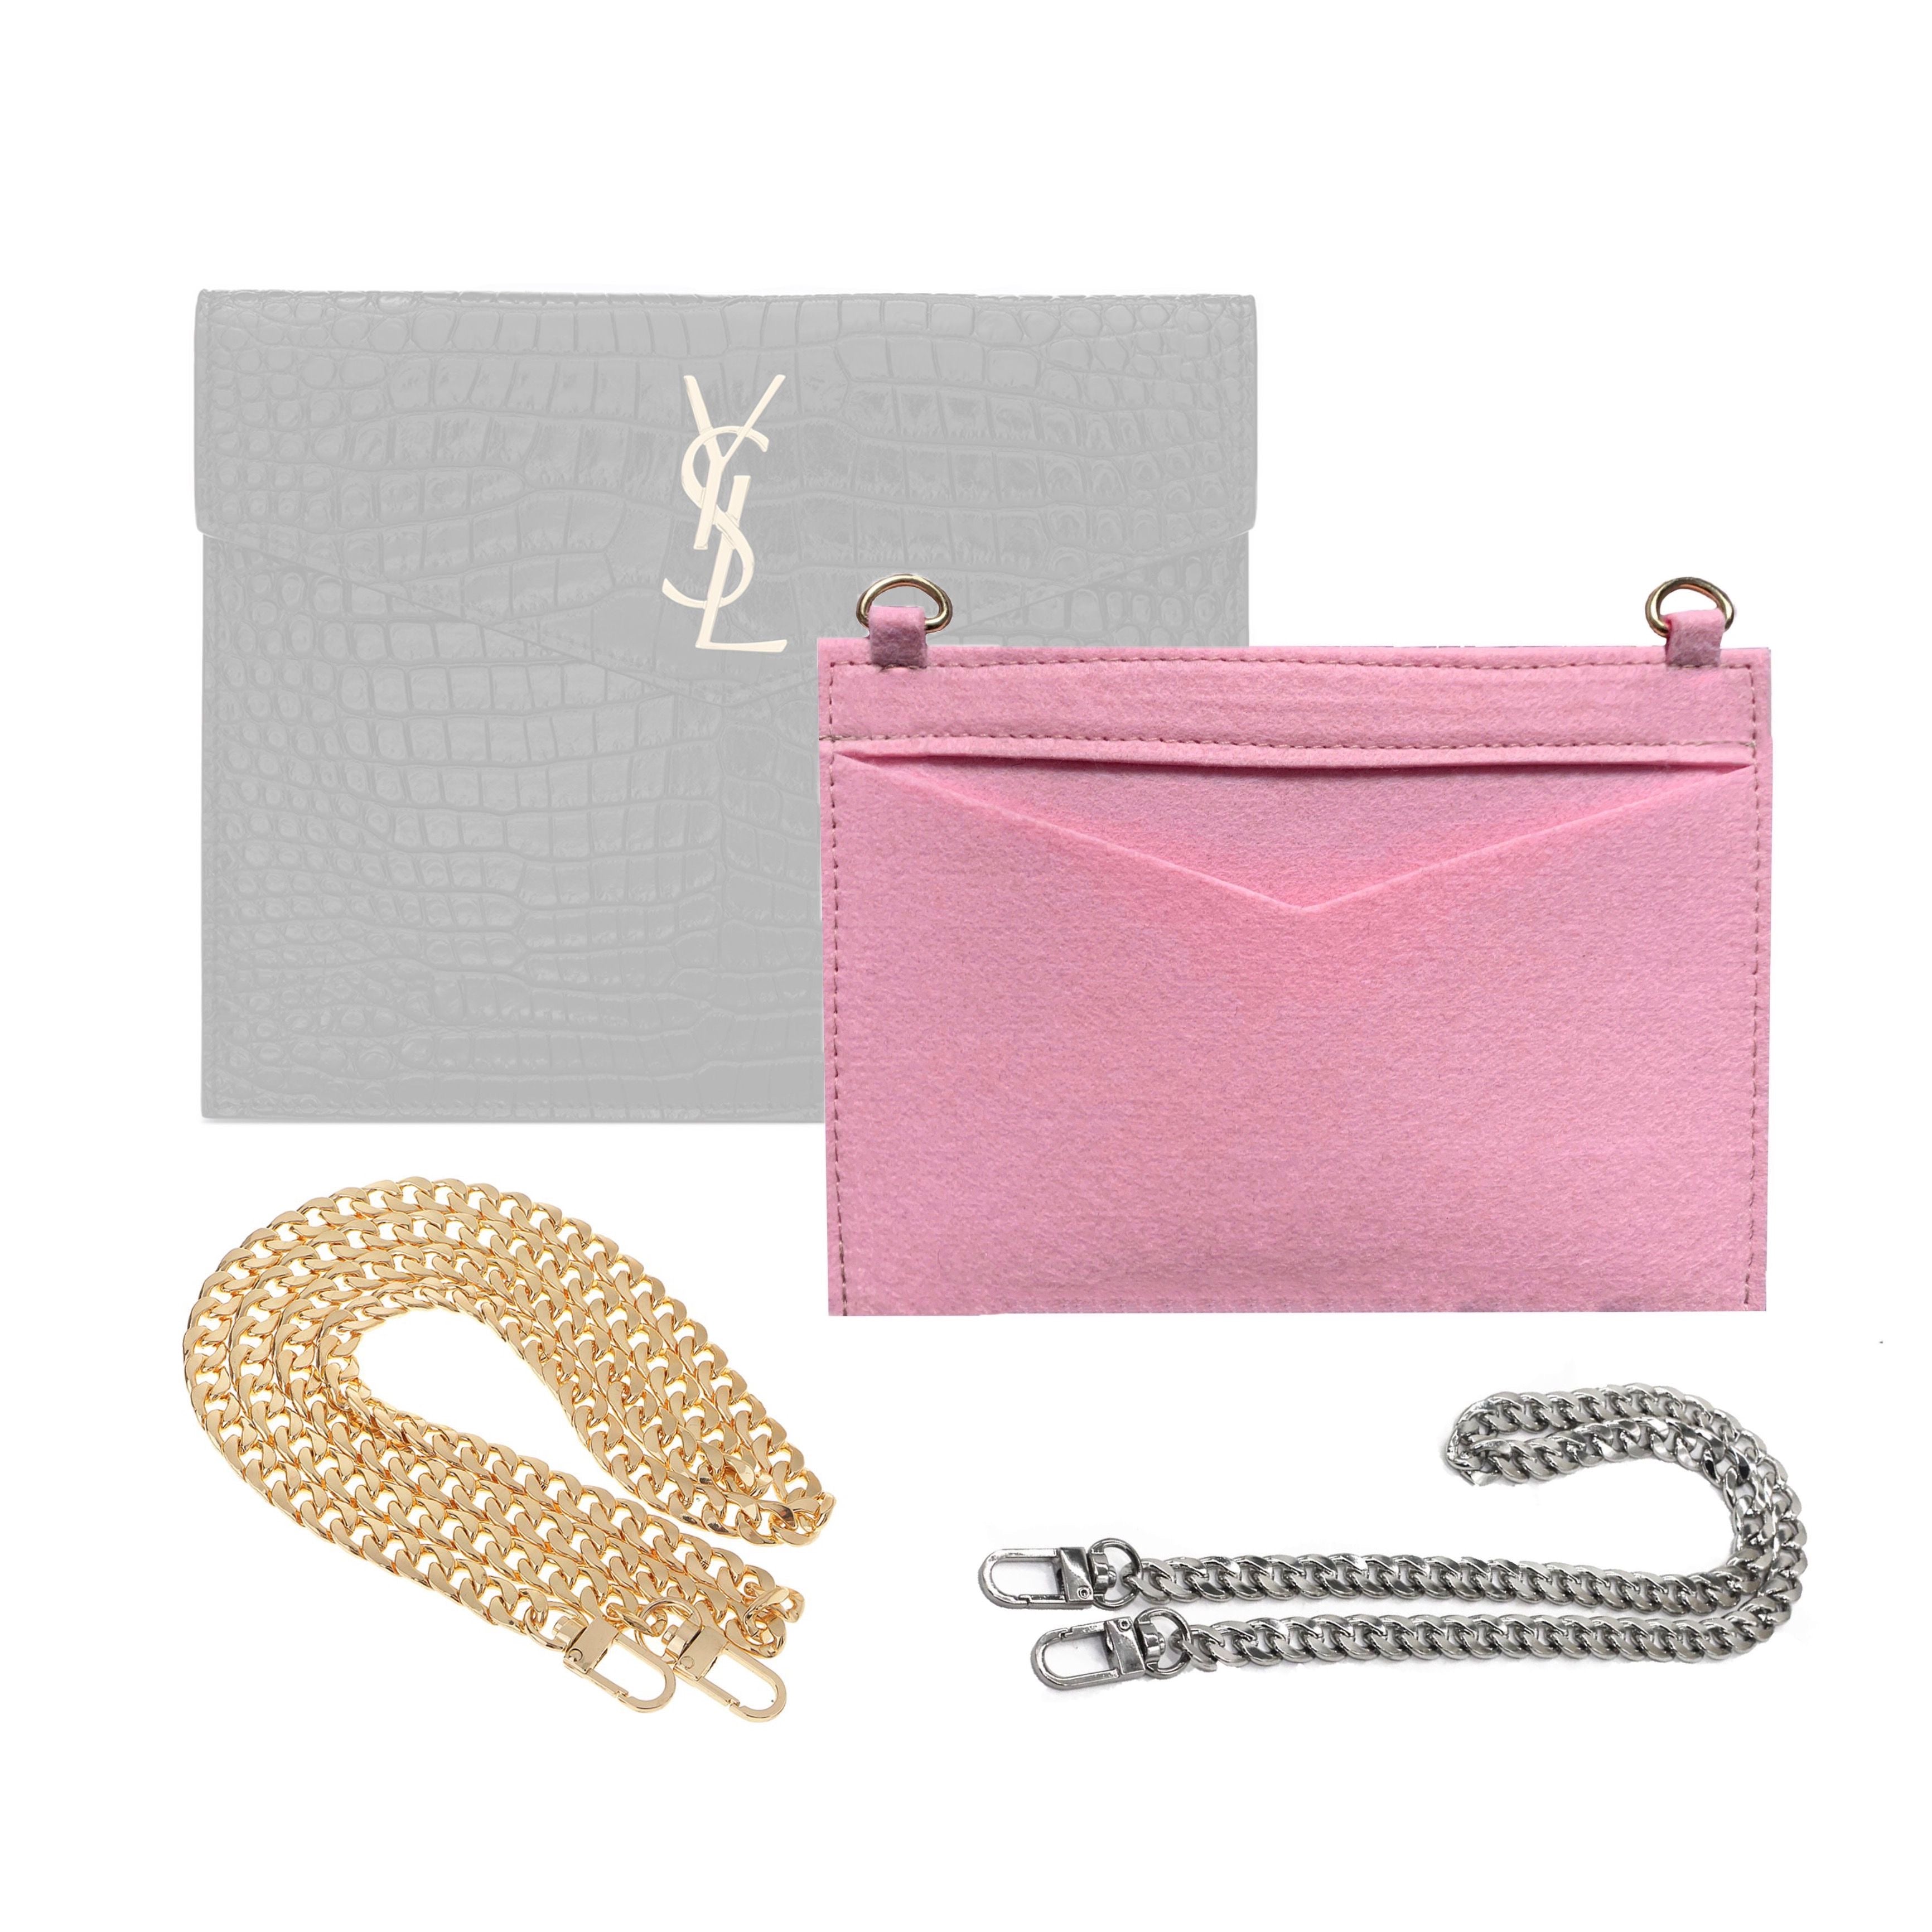 Conversion Kit for Uptown Baby Clutch (with gold or silver chain) | Accessory for YSL Swing | Yves Saint Laurent Strap | clutch ysl | YSL Handbag Strap | Bag Insert Organizer | YSL Swing Strap | Luxury Bag Accessory | Bag Protector”